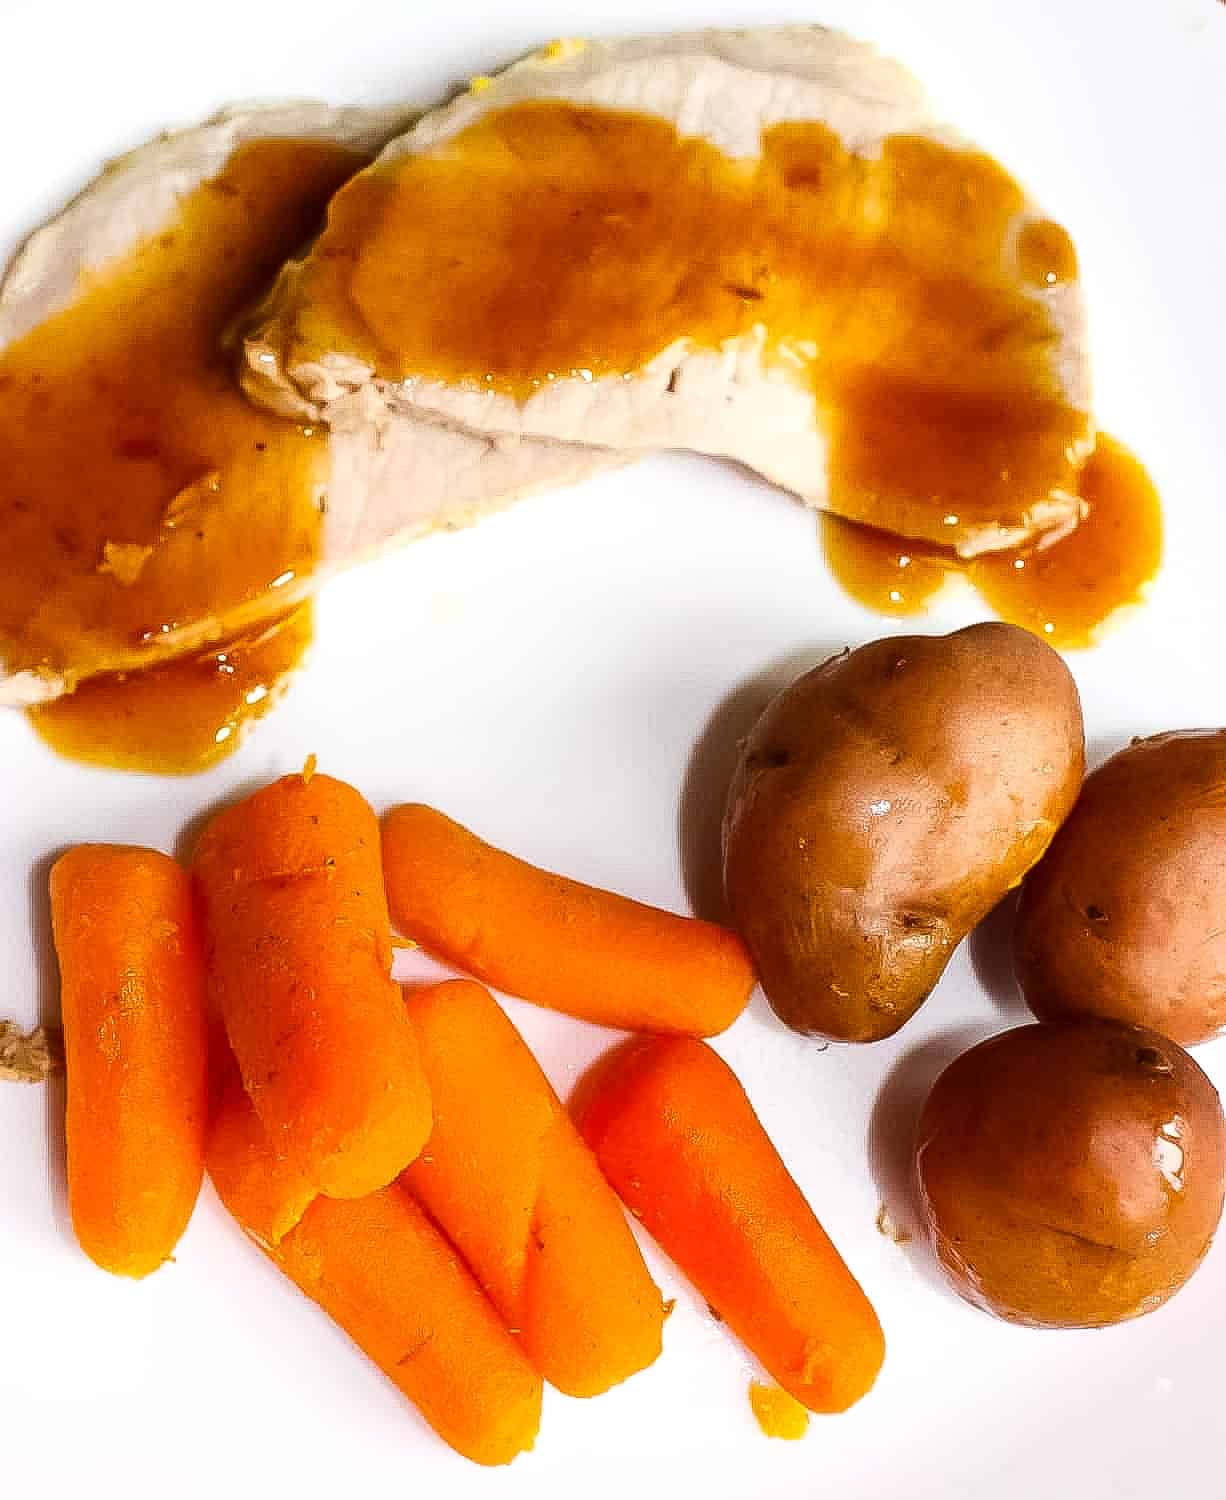 Instant Pot Pork Roast with Baby Carrots & Potatoes is an easy dinner recipe cooked all in one pot. This easy Instant Pot recipe is perfect for beginners.